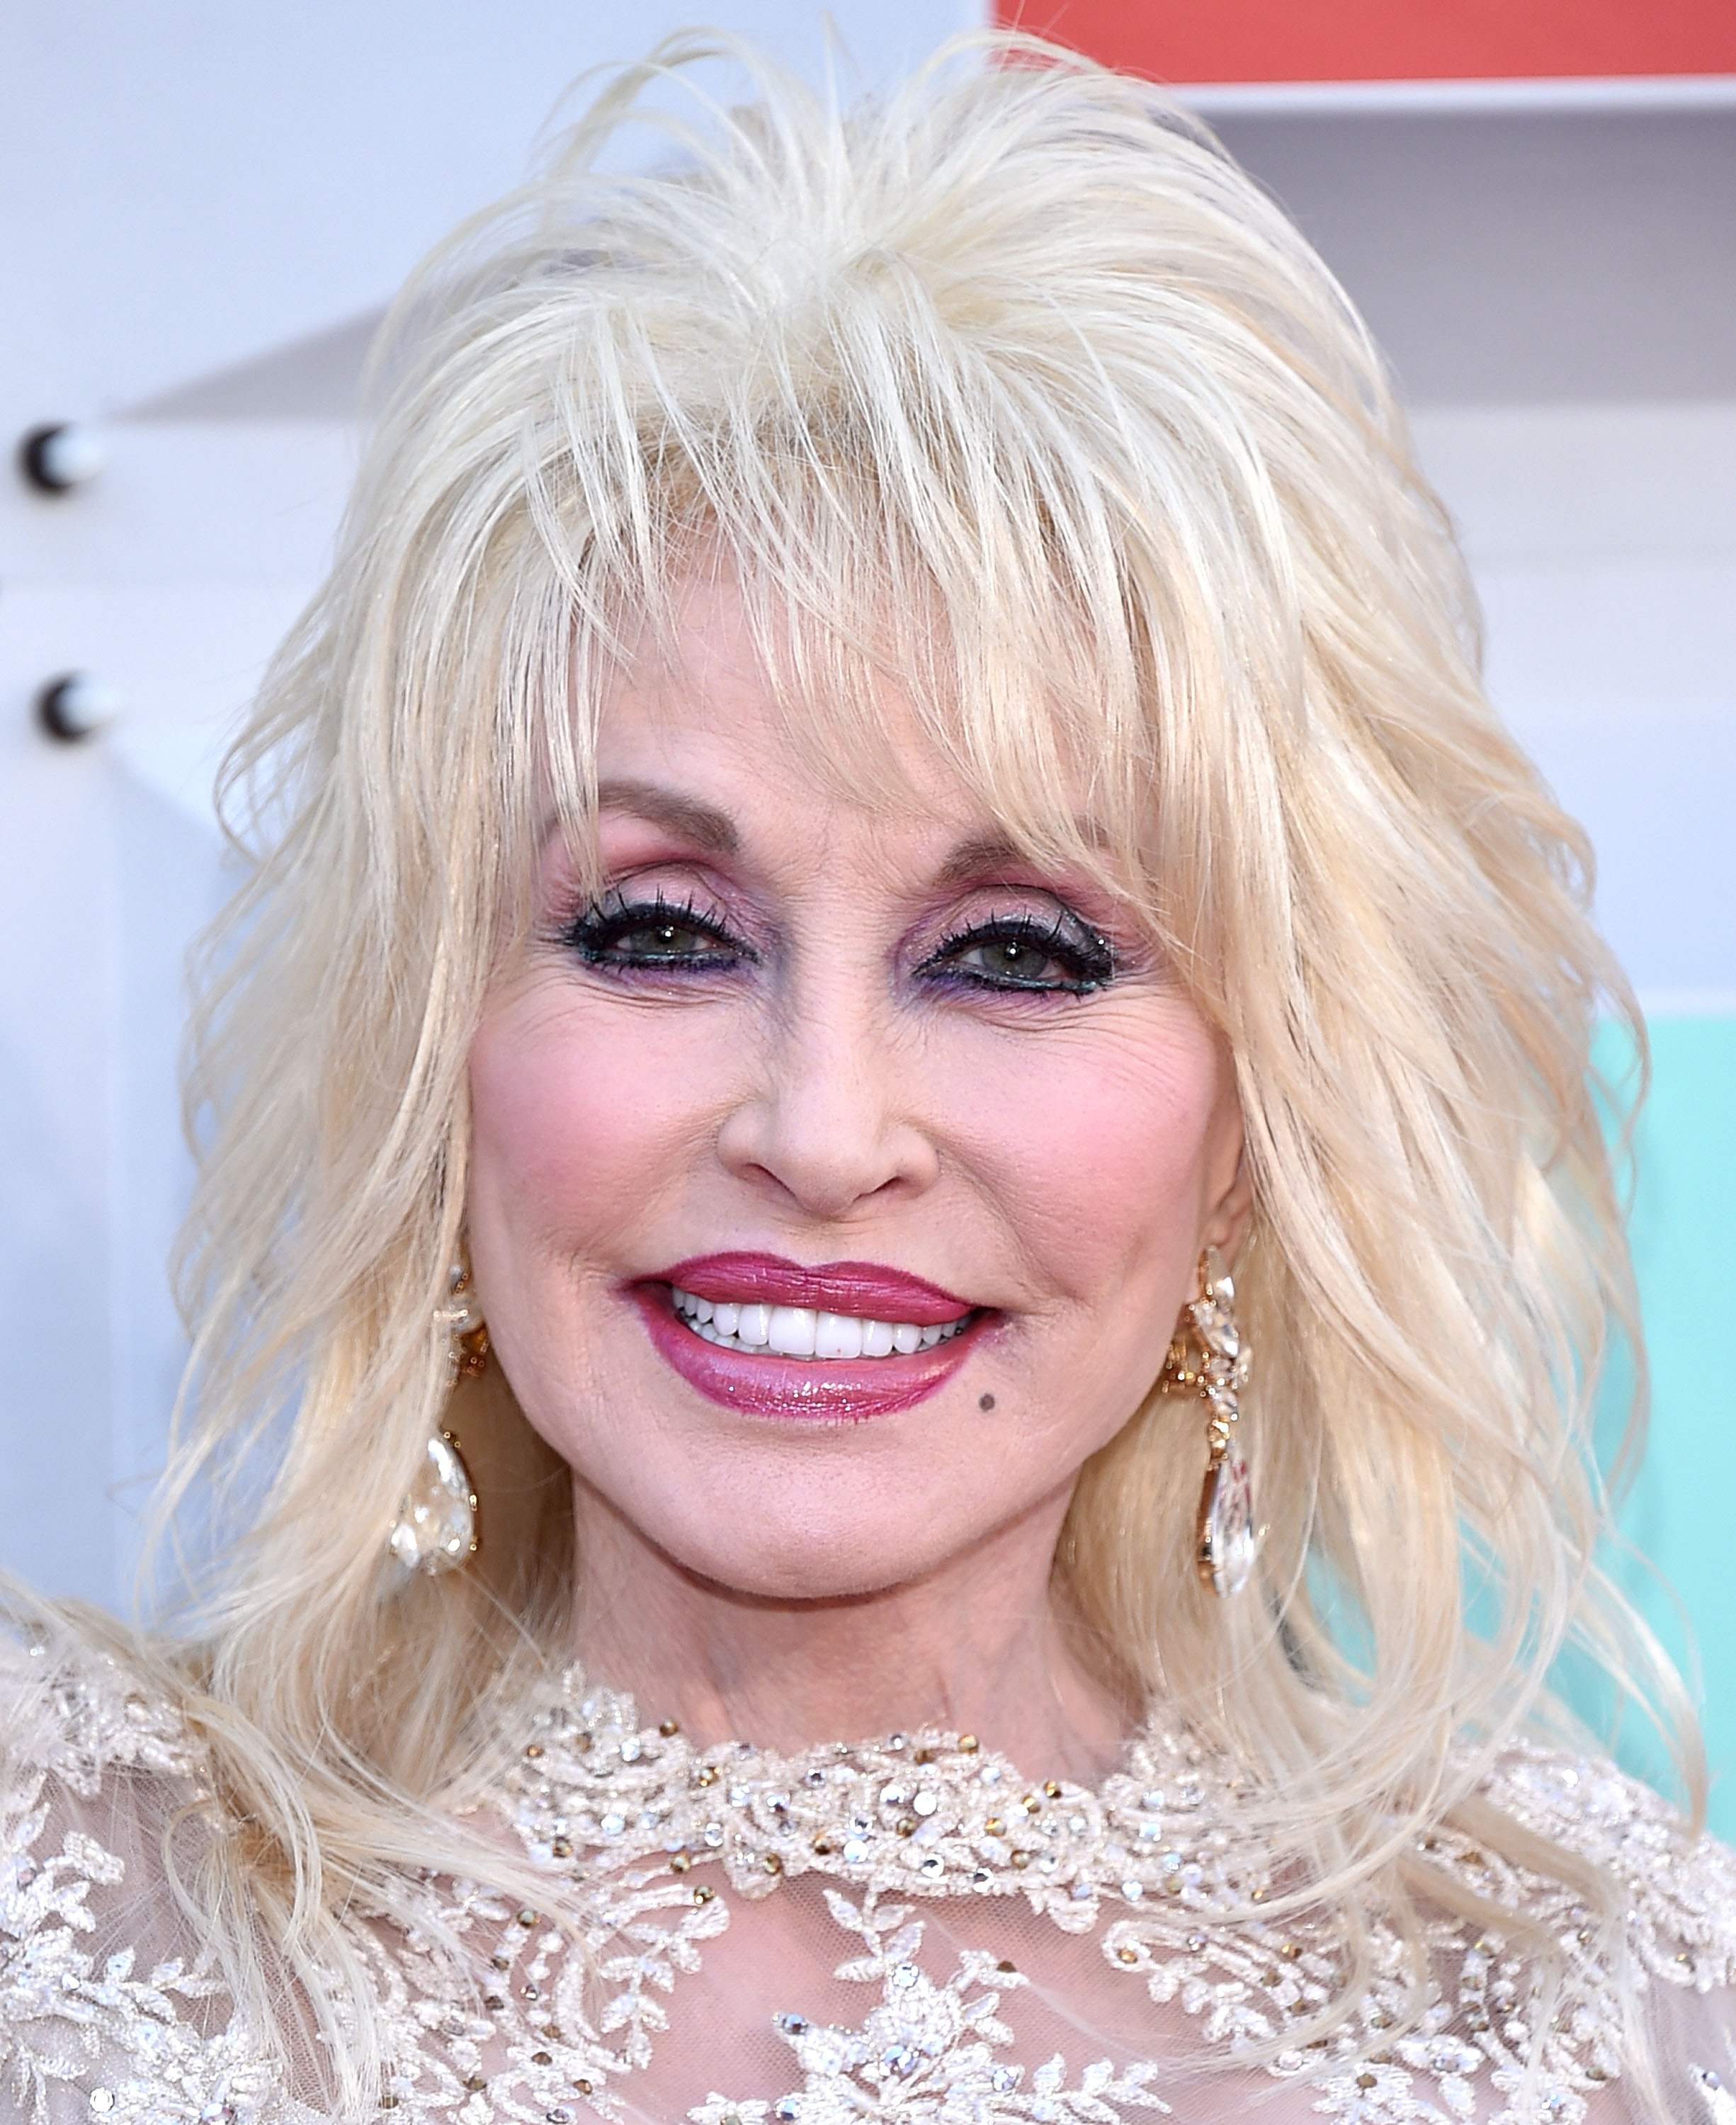 Dolly Parton besucht die 51st Academy of Country Music Awards in Las Vegas, Nevada, am 3. April 2016. | Quelle: Getty Images